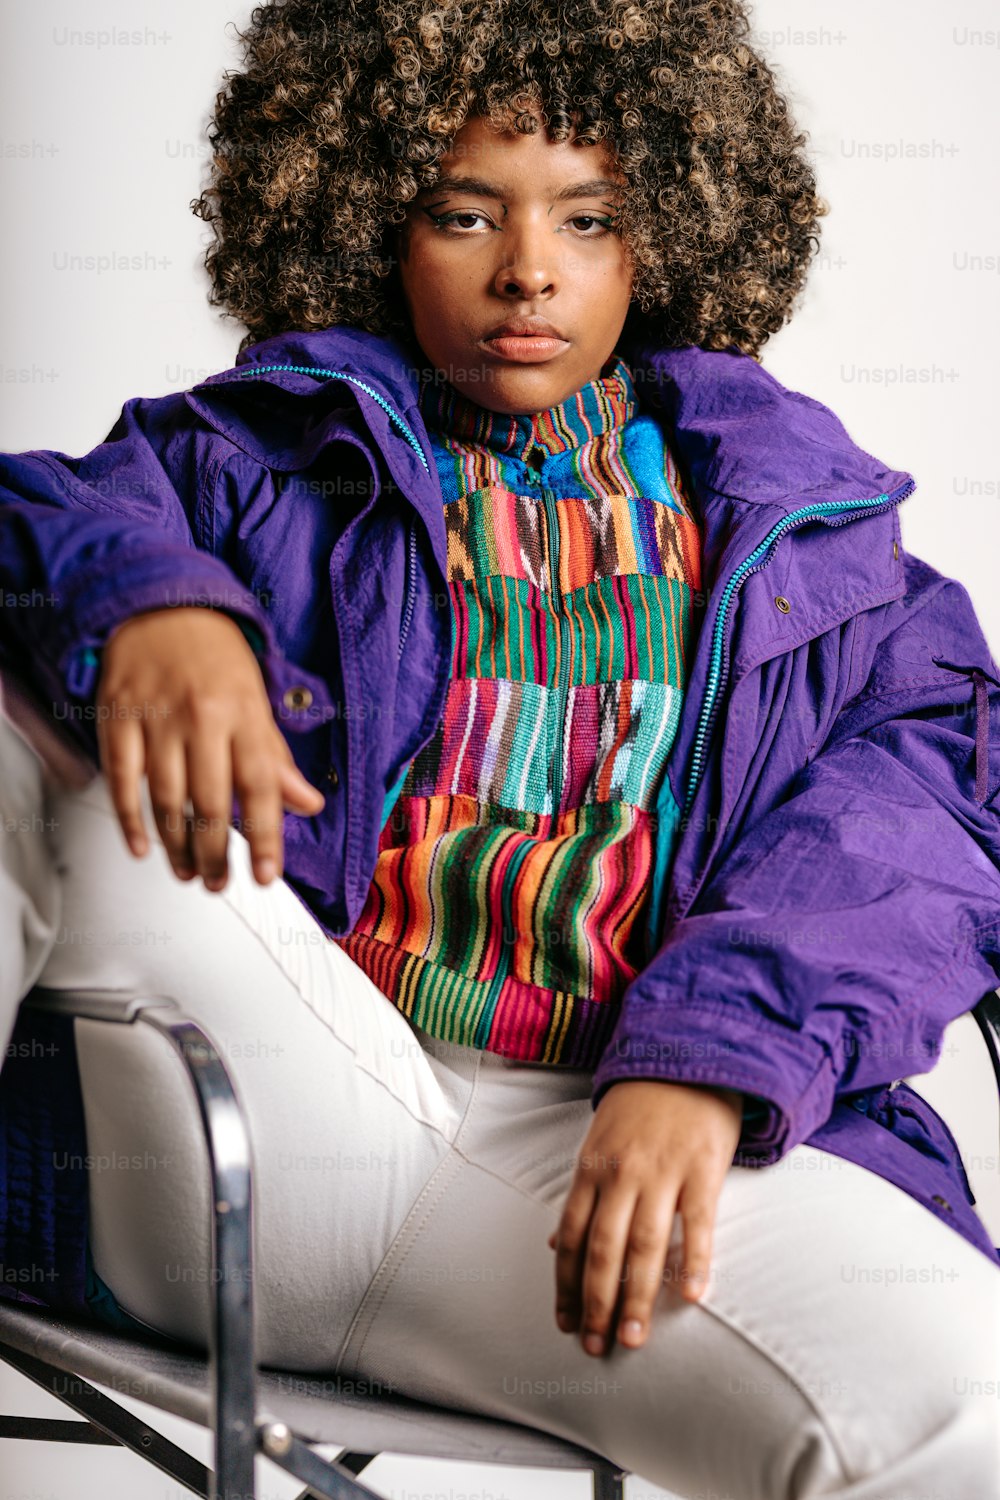 a woman sitting on a chair wearing a purple jacket